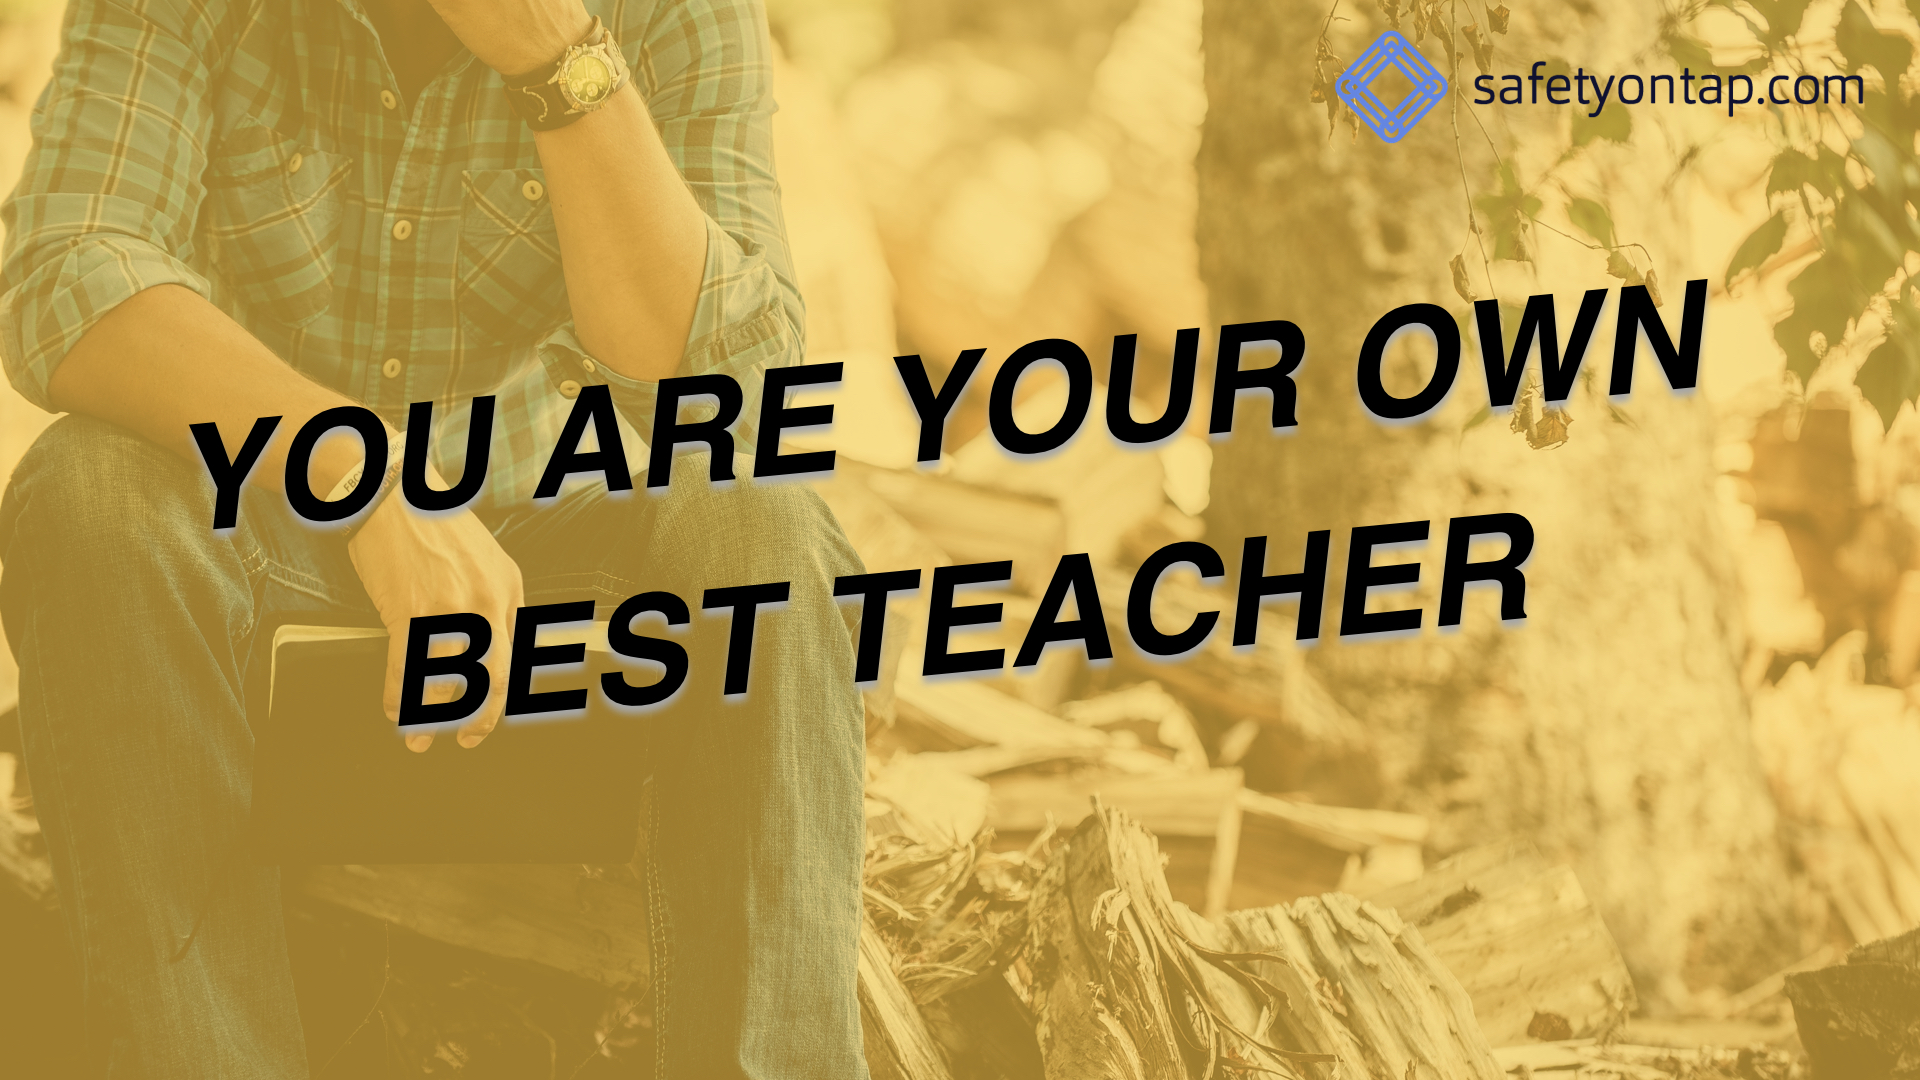 Ep062: You are your own best teacher